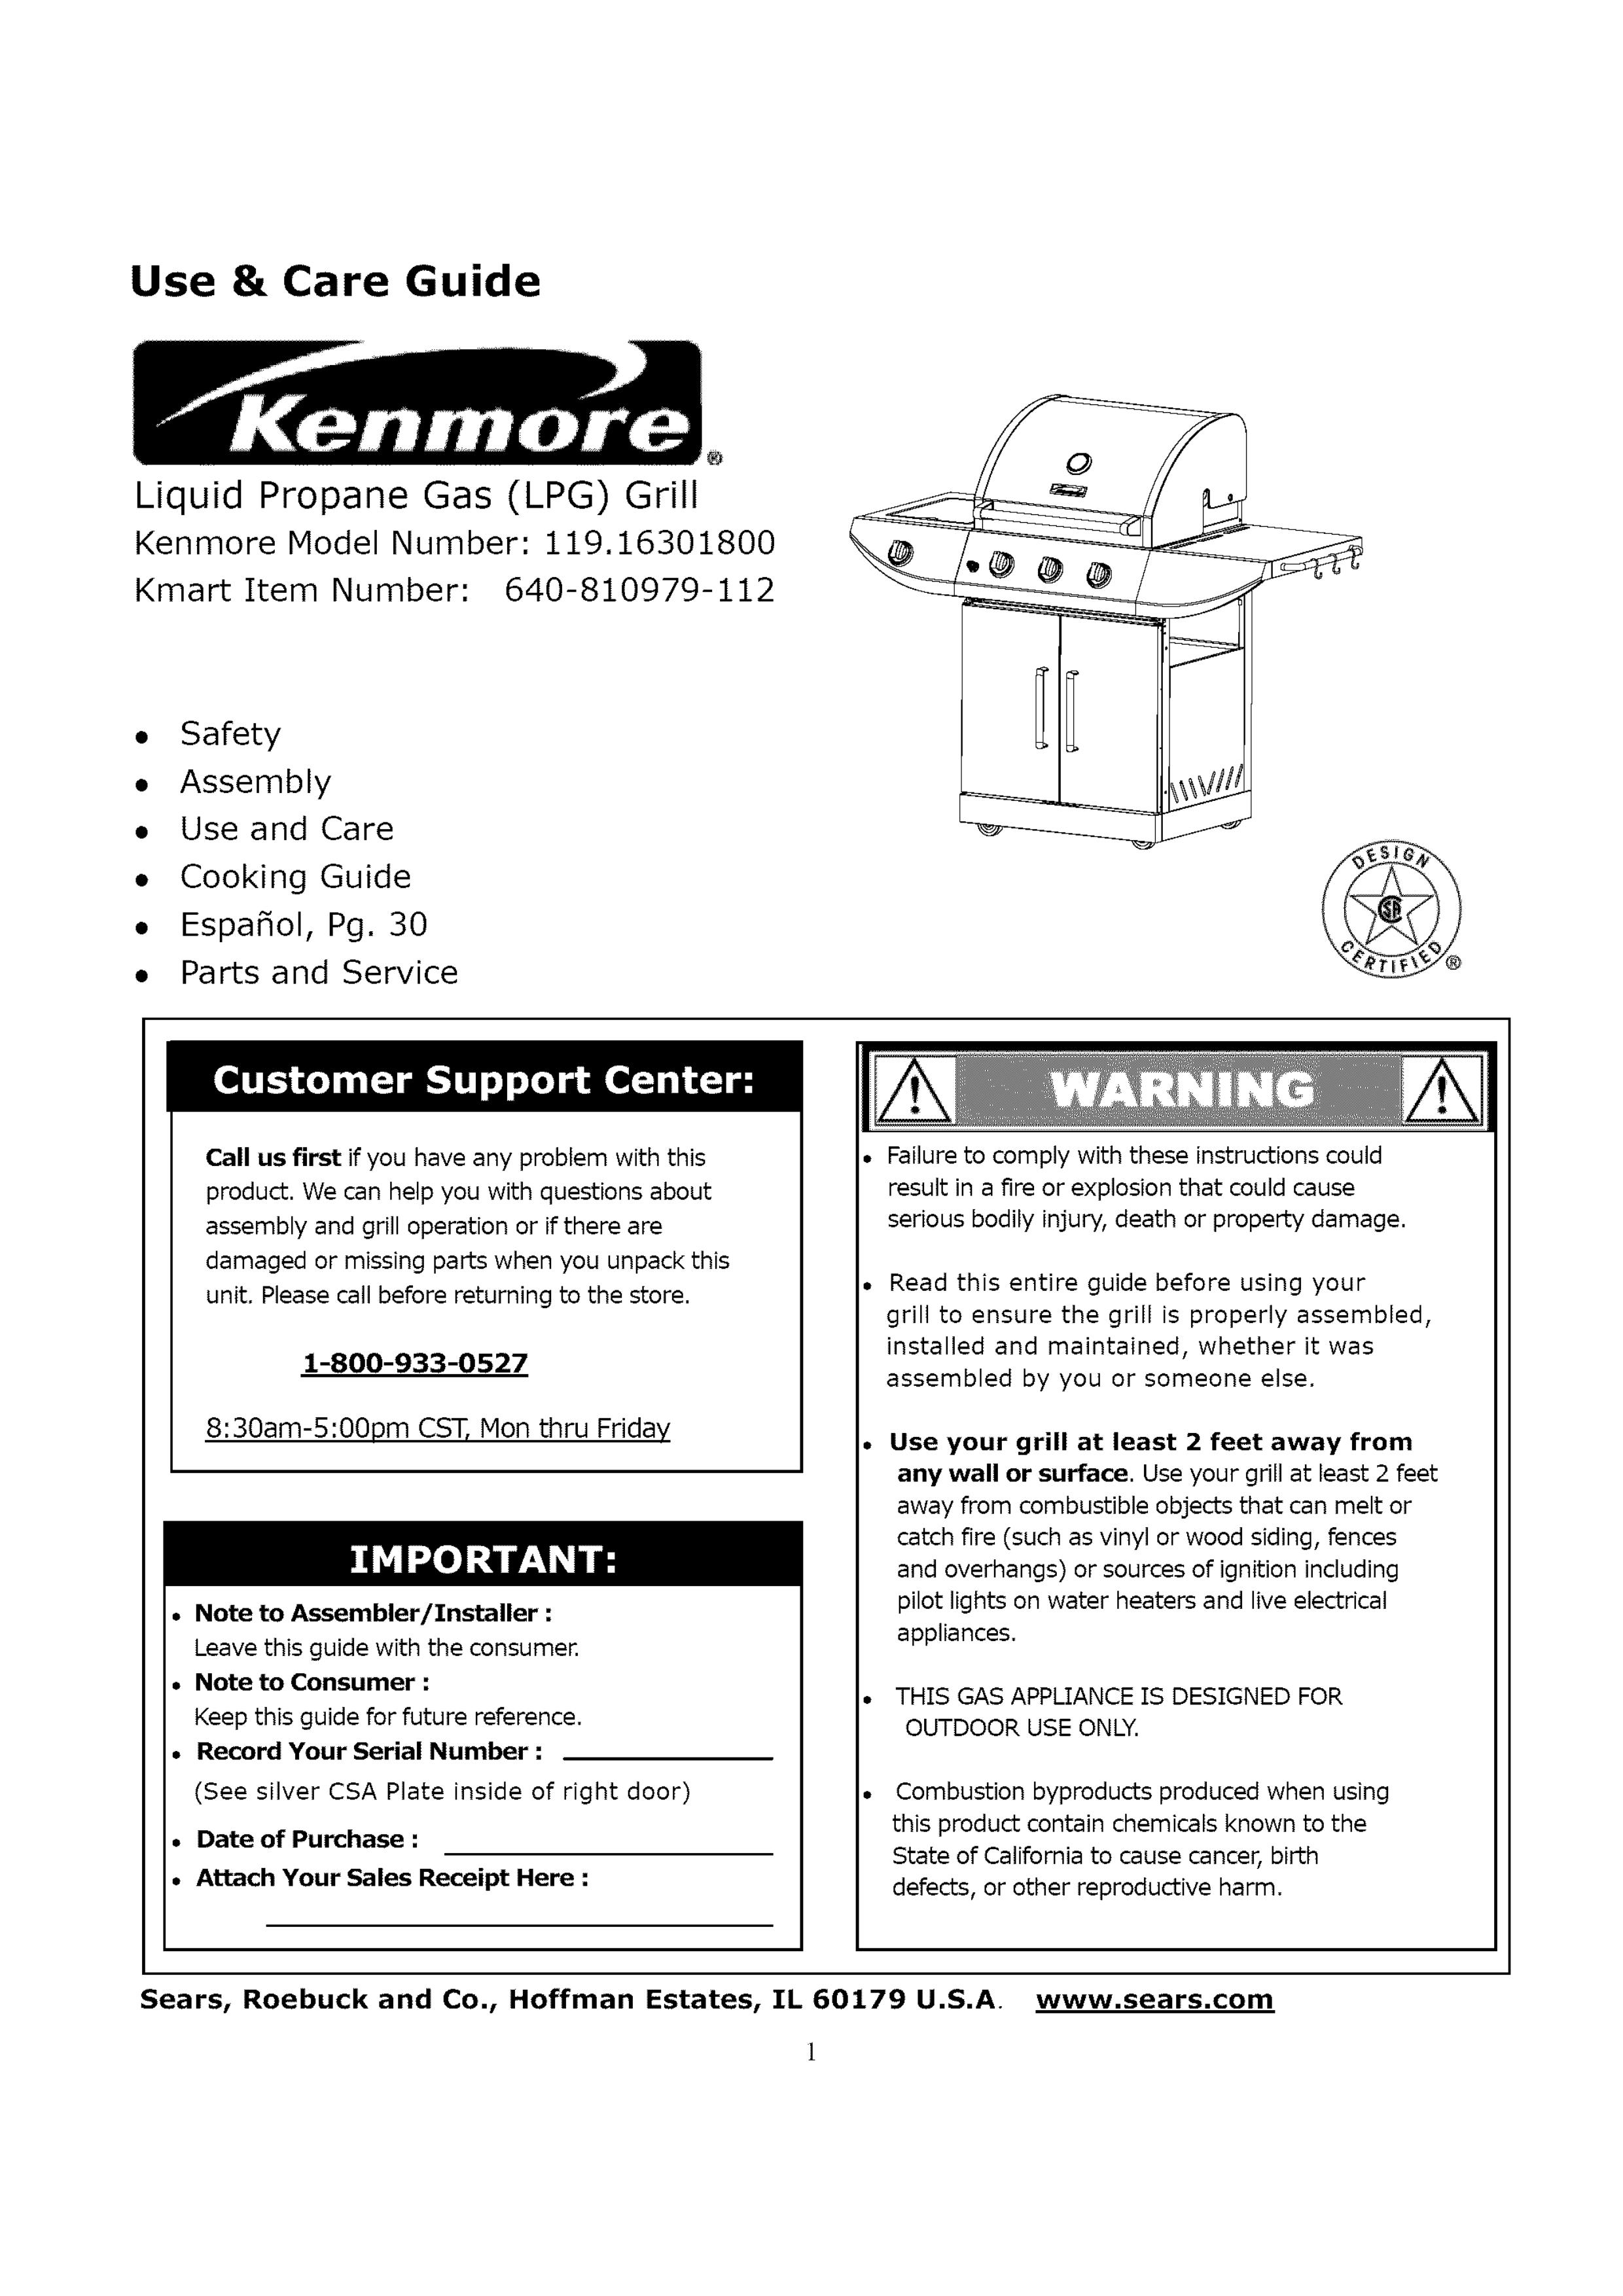 Kenmore 119.163018 Gas Grill User Manual